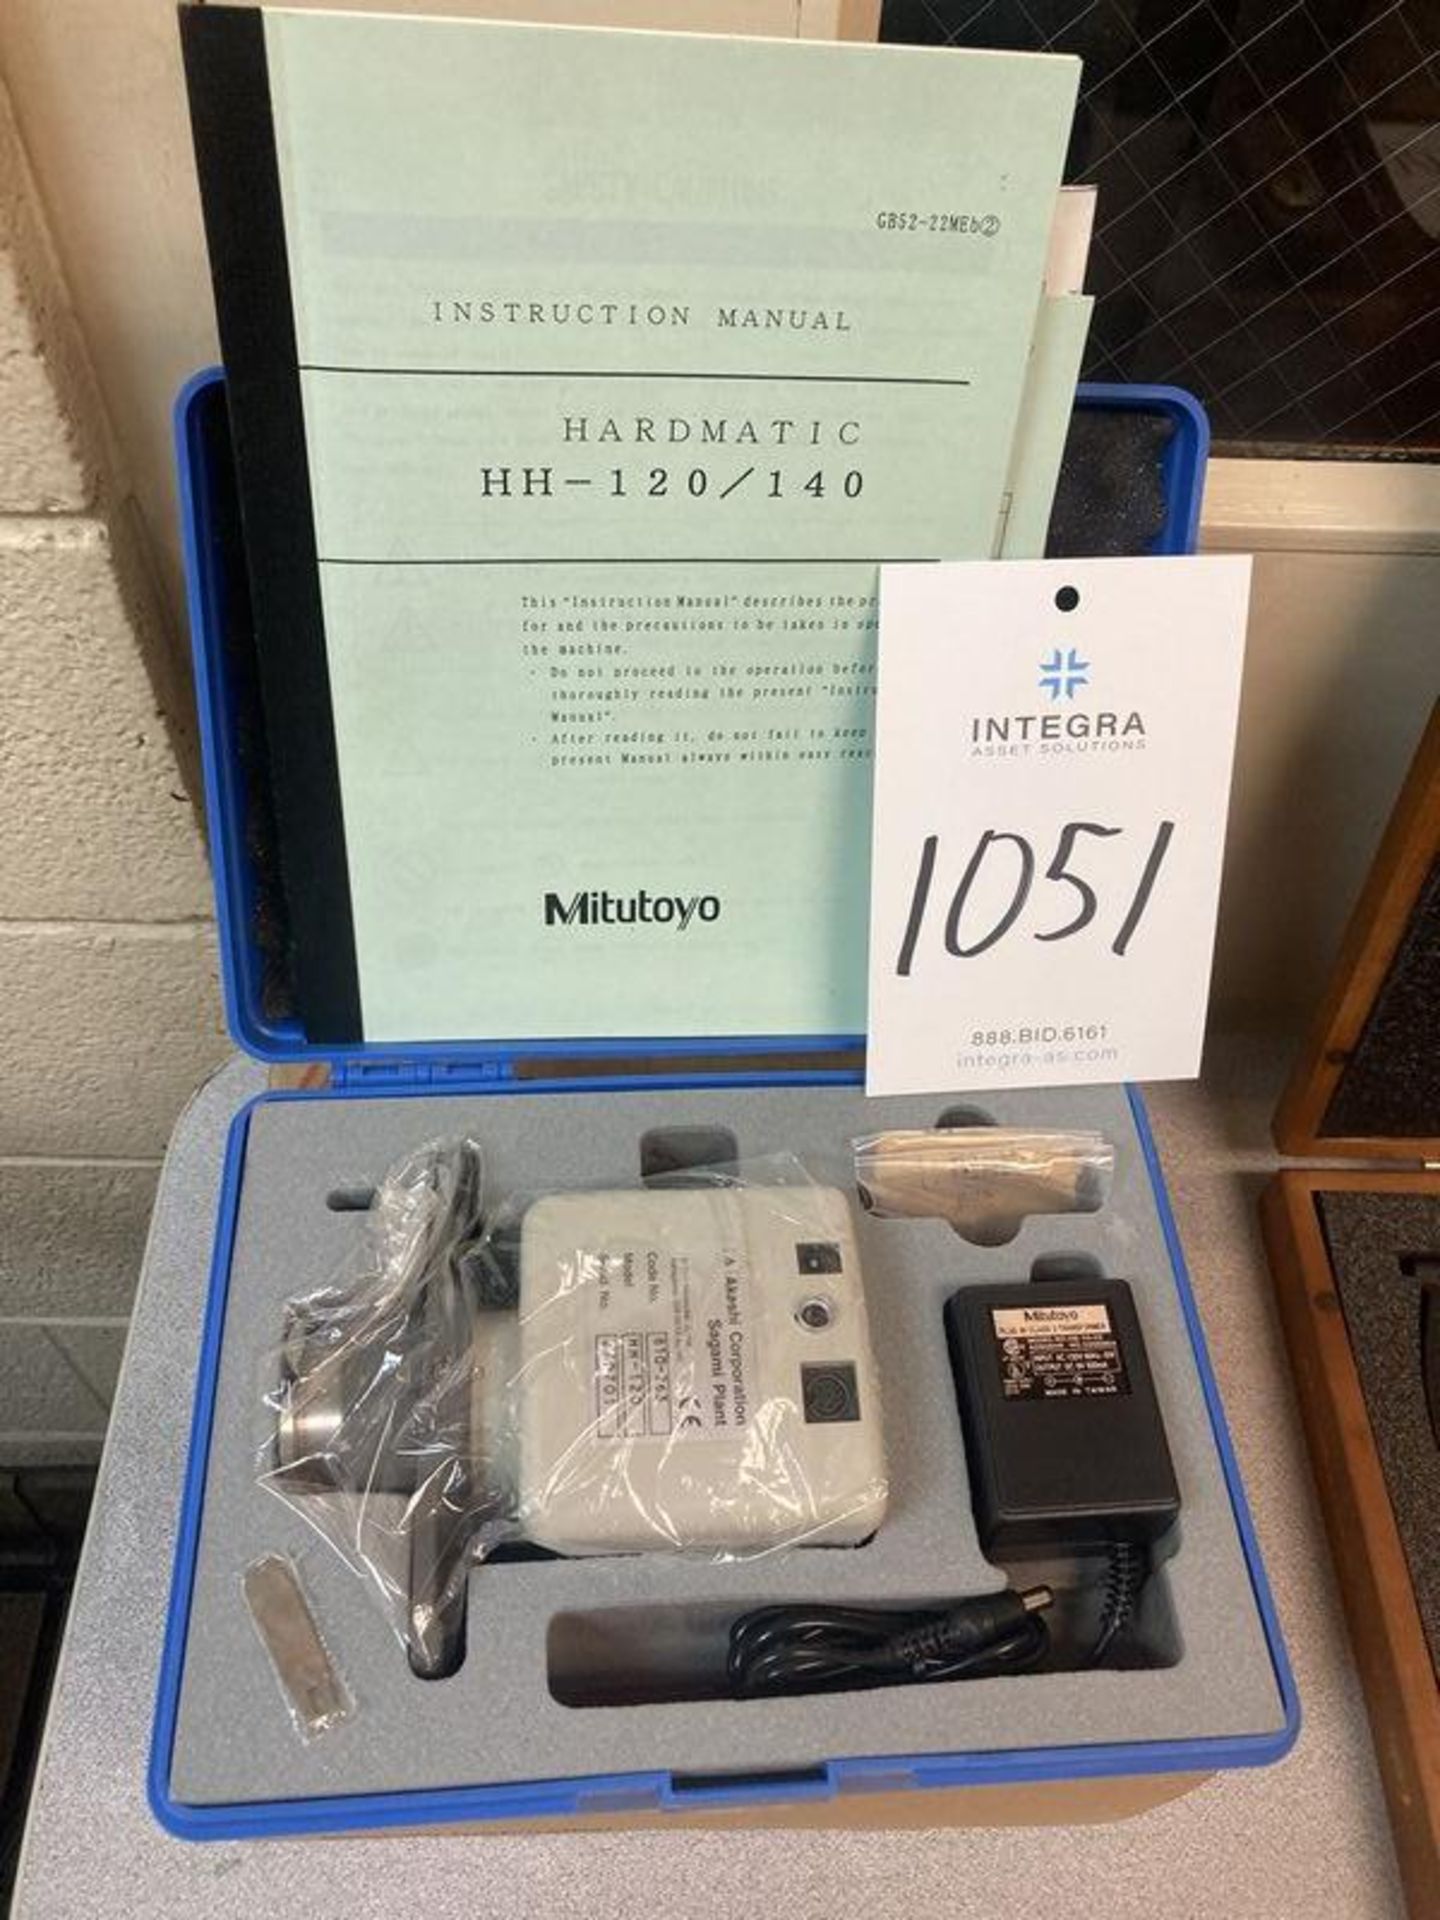 Mitutoyo HH-120/140 Hardmatic Portable Hardness Tester - Image 3 of 3